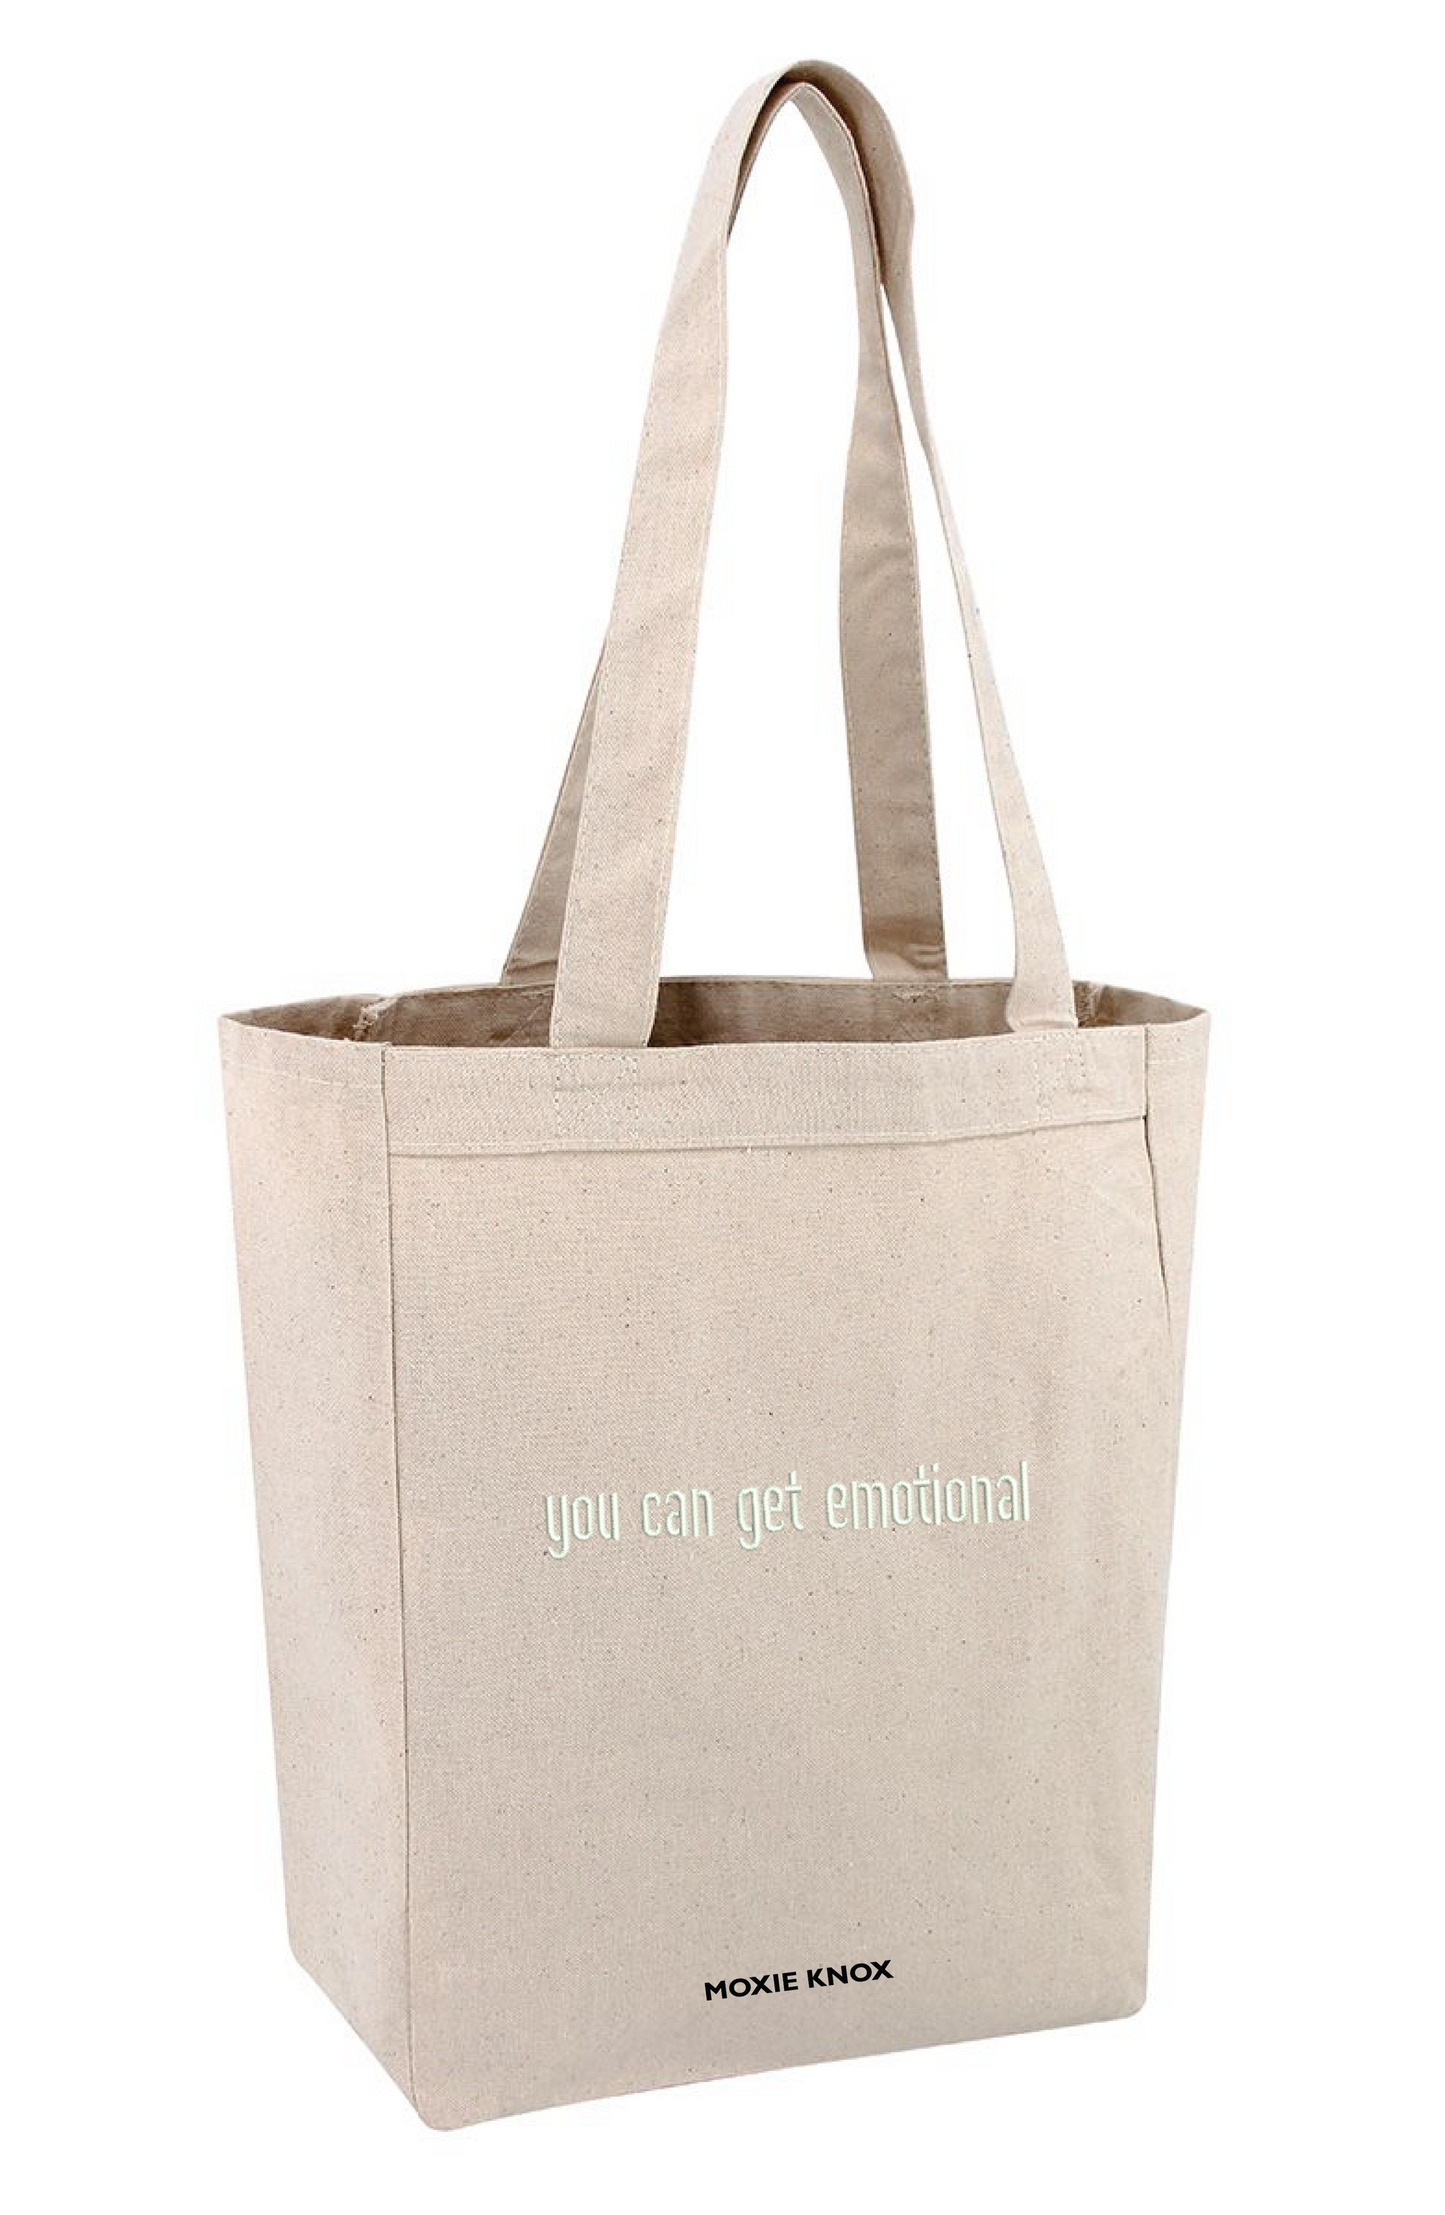 "You Can Get Emotional" Premium Embroidered Tote Bag